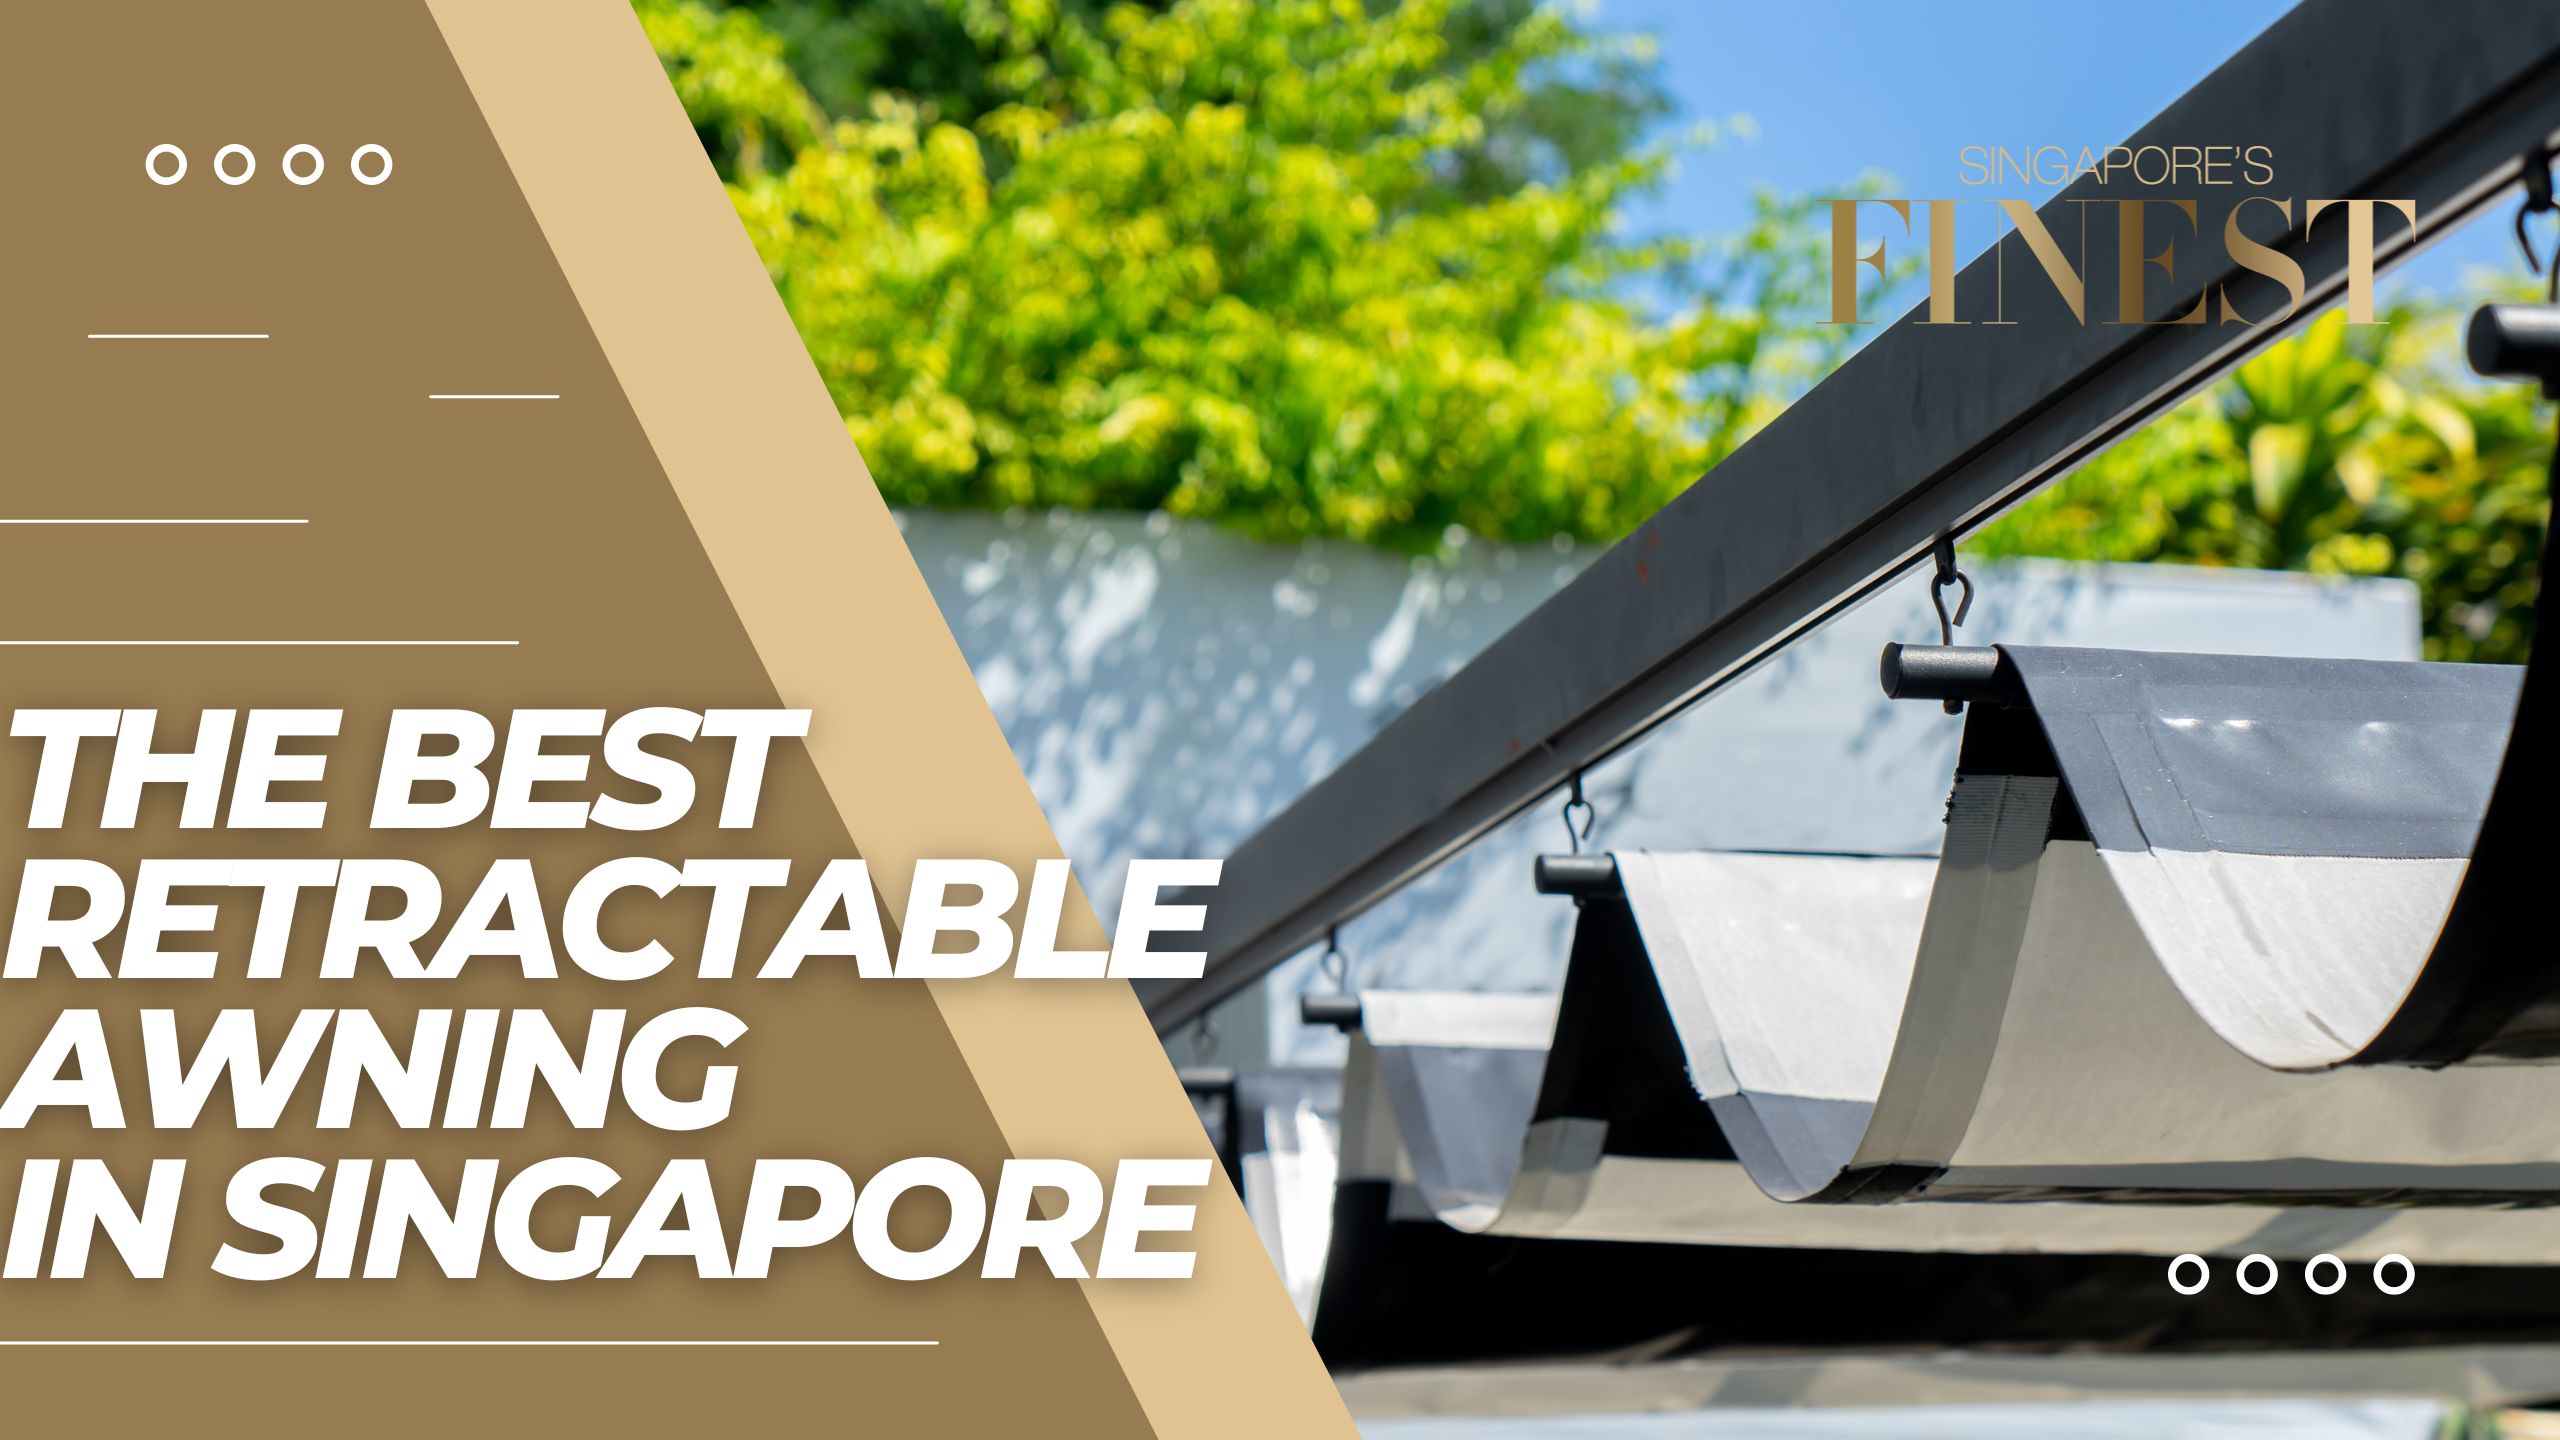 The Finest Retractable Awning in Singapore